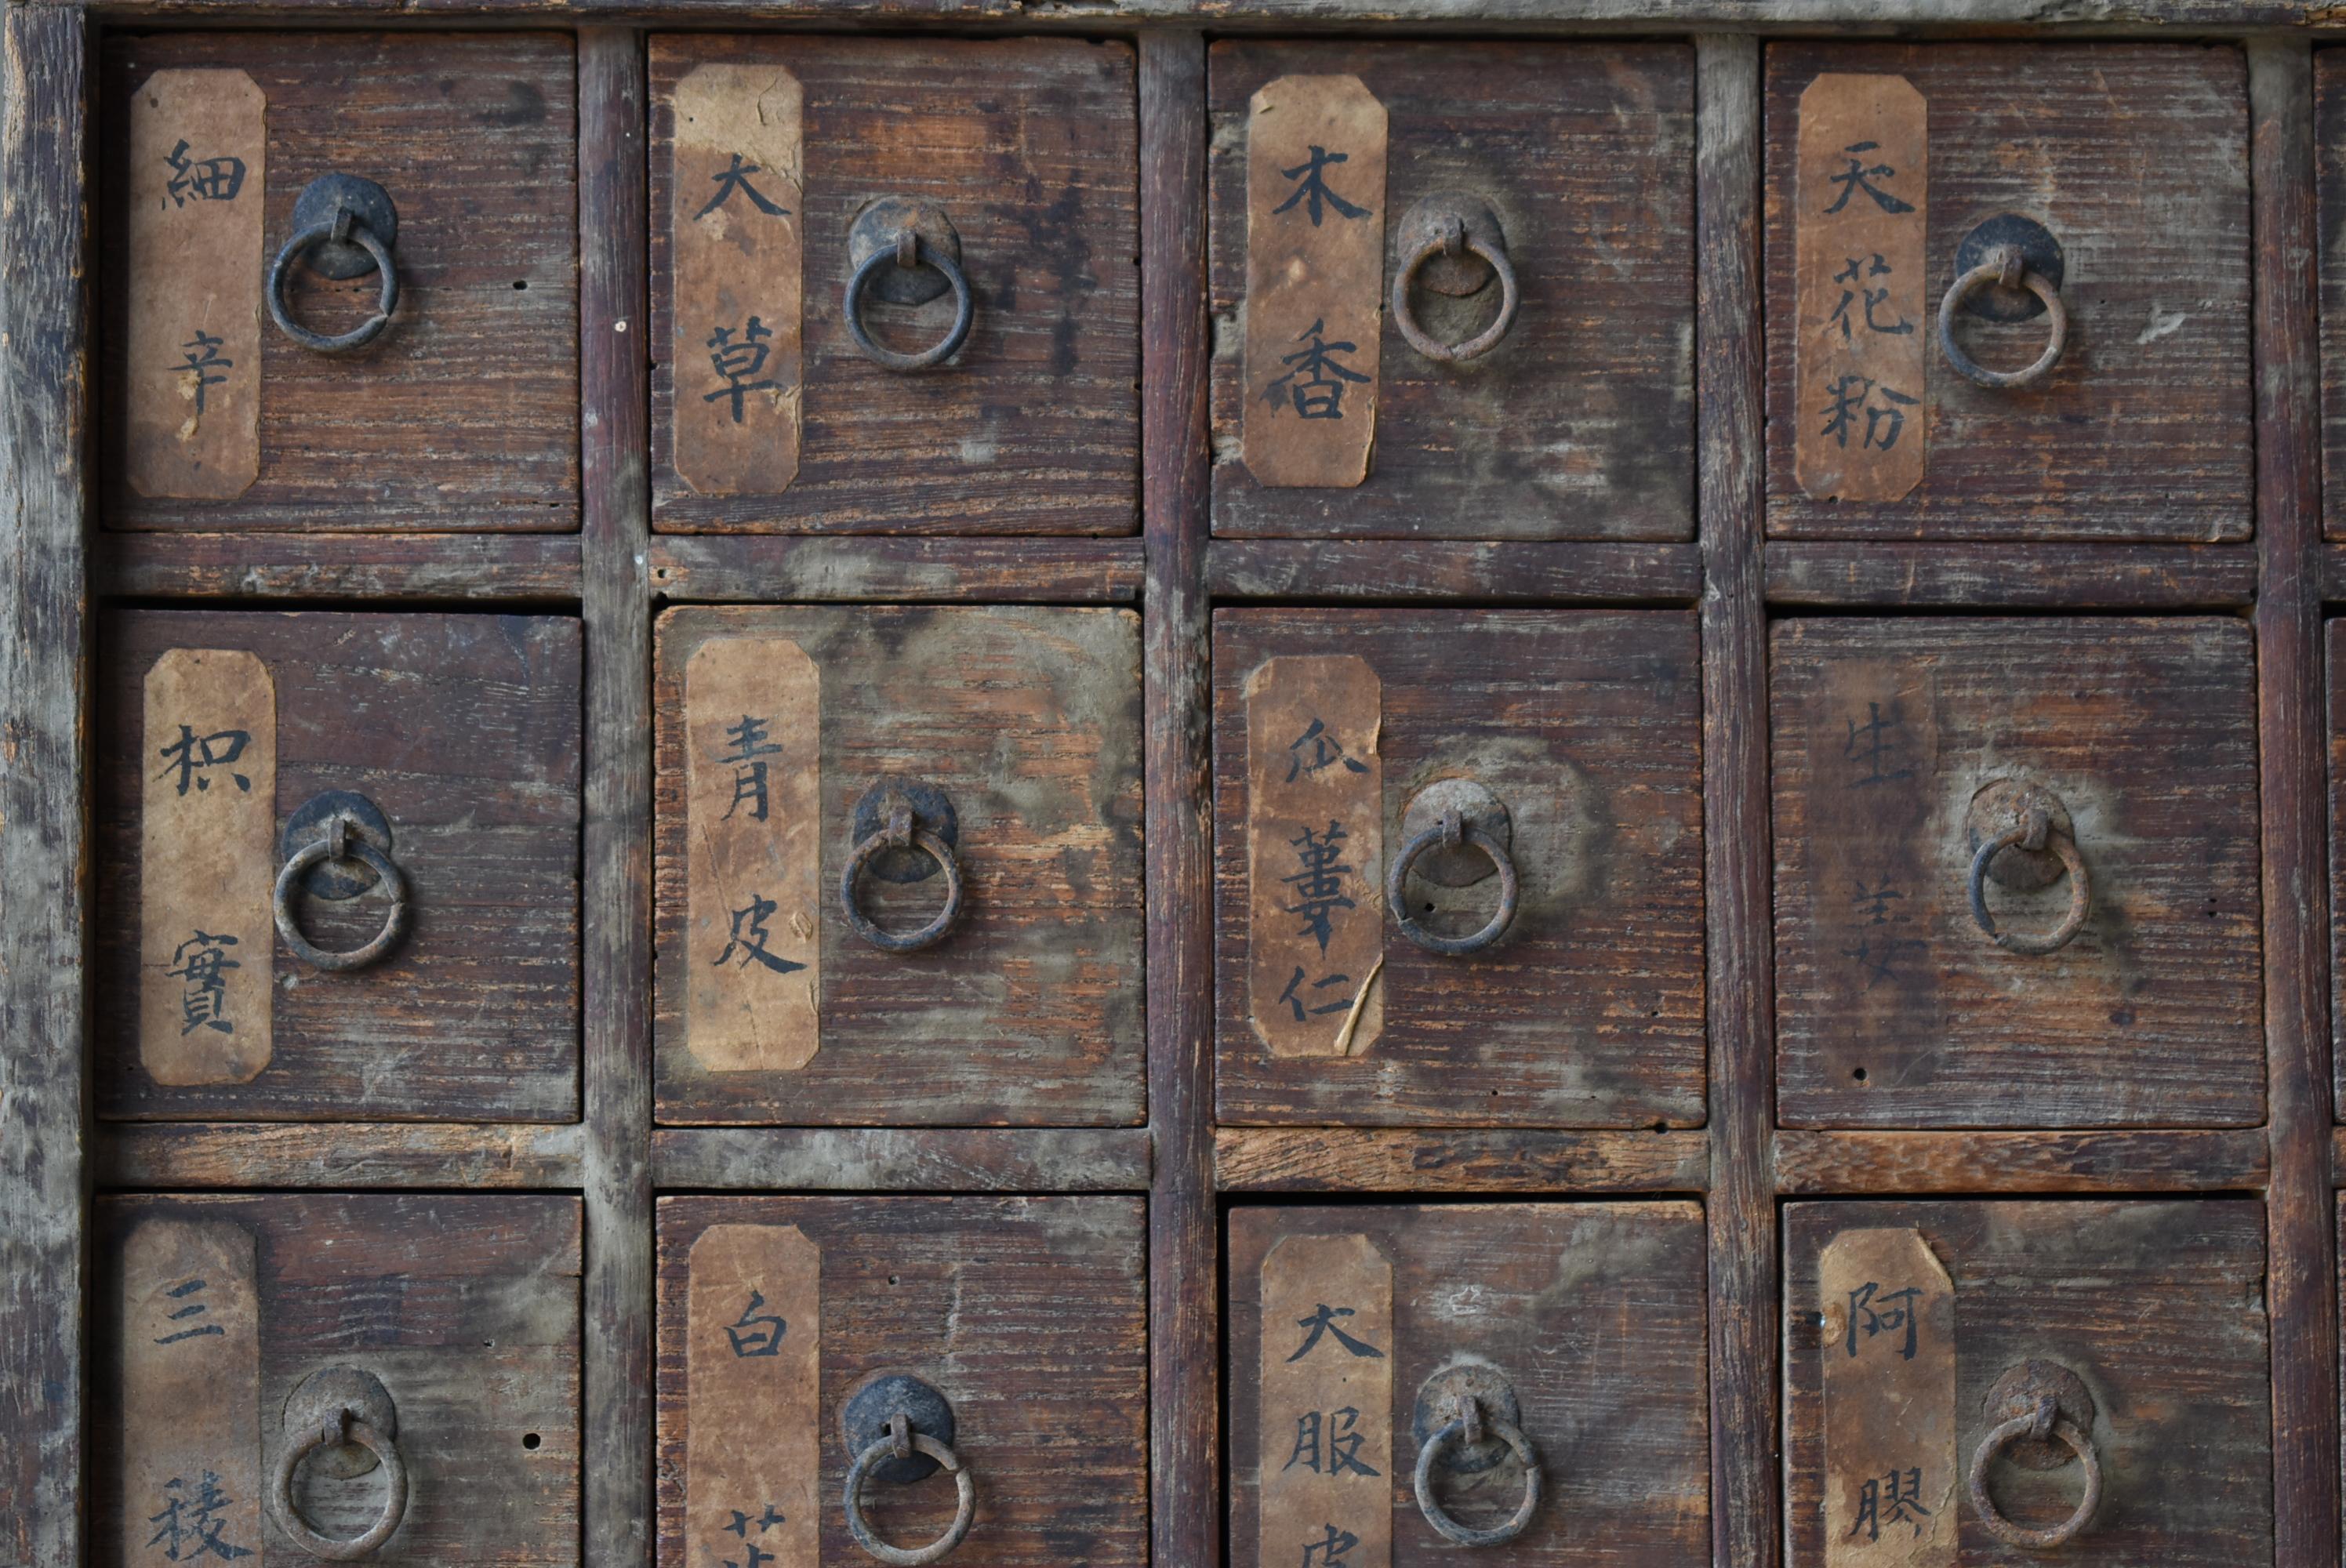 A drawer containing old Japanese medicine.
Furniture from the Edo period. (1750s-1850s)
The material is paulownia, which is a high-grade material.

This is very rare.
It's a miracle that all the drawer handles remain.
All drawers are